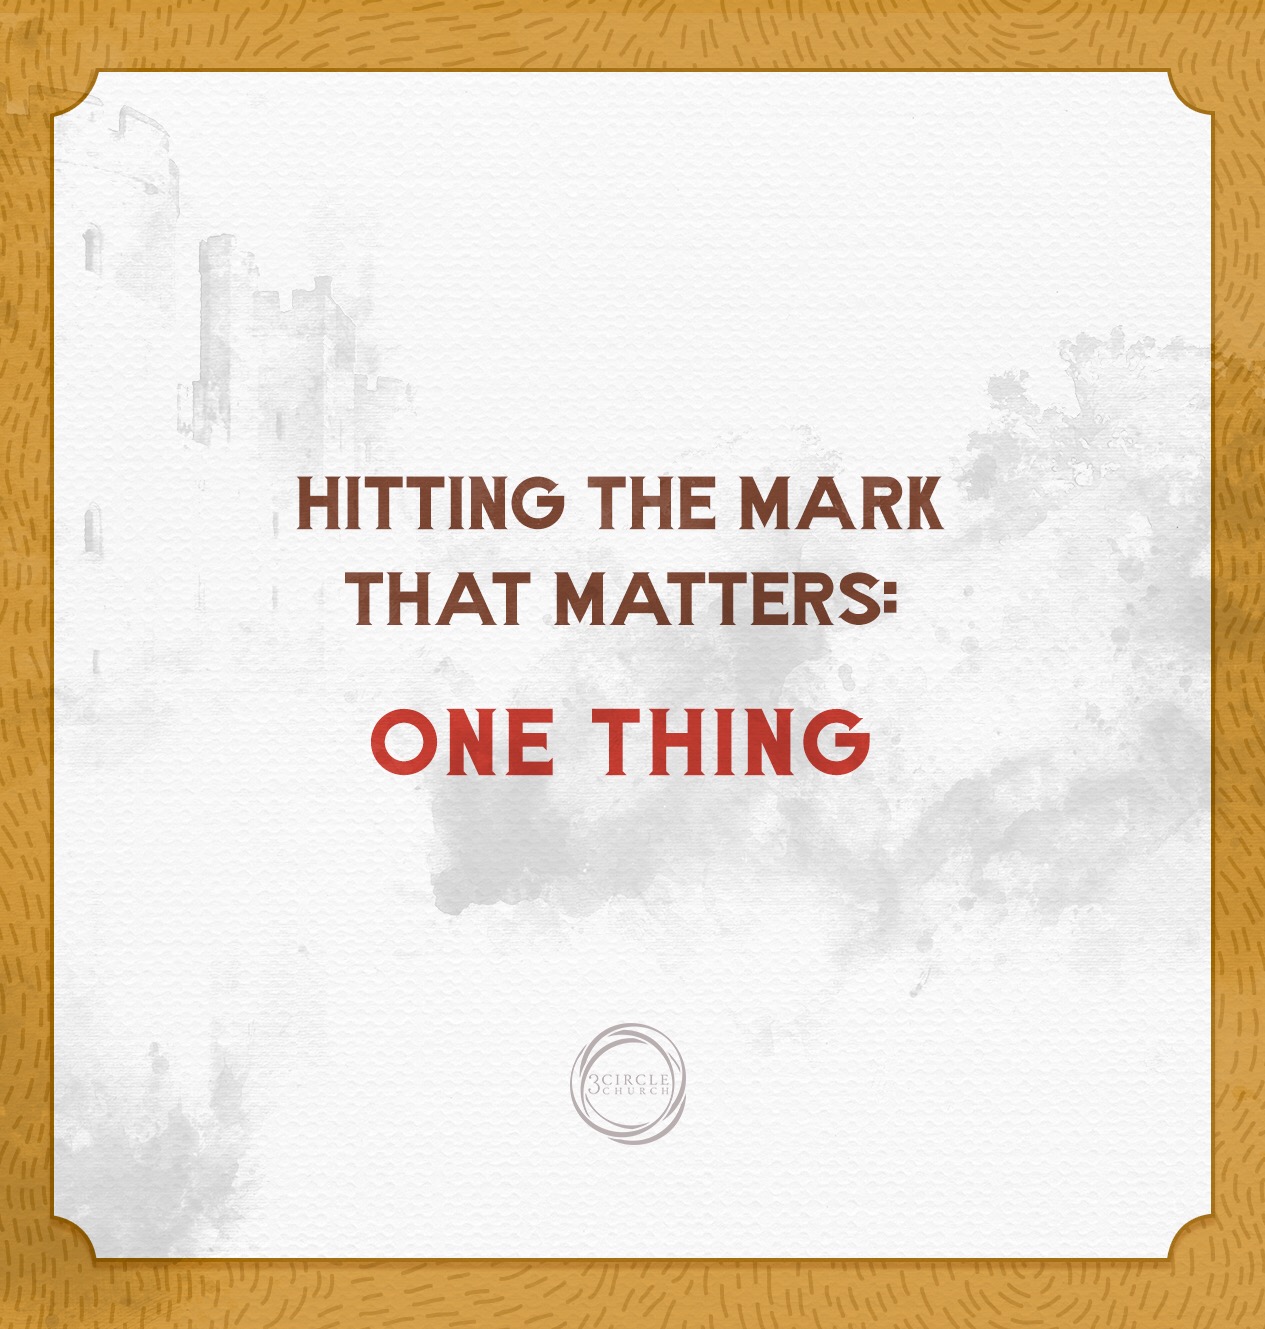 Hitting the Mark that Matters: One Thing